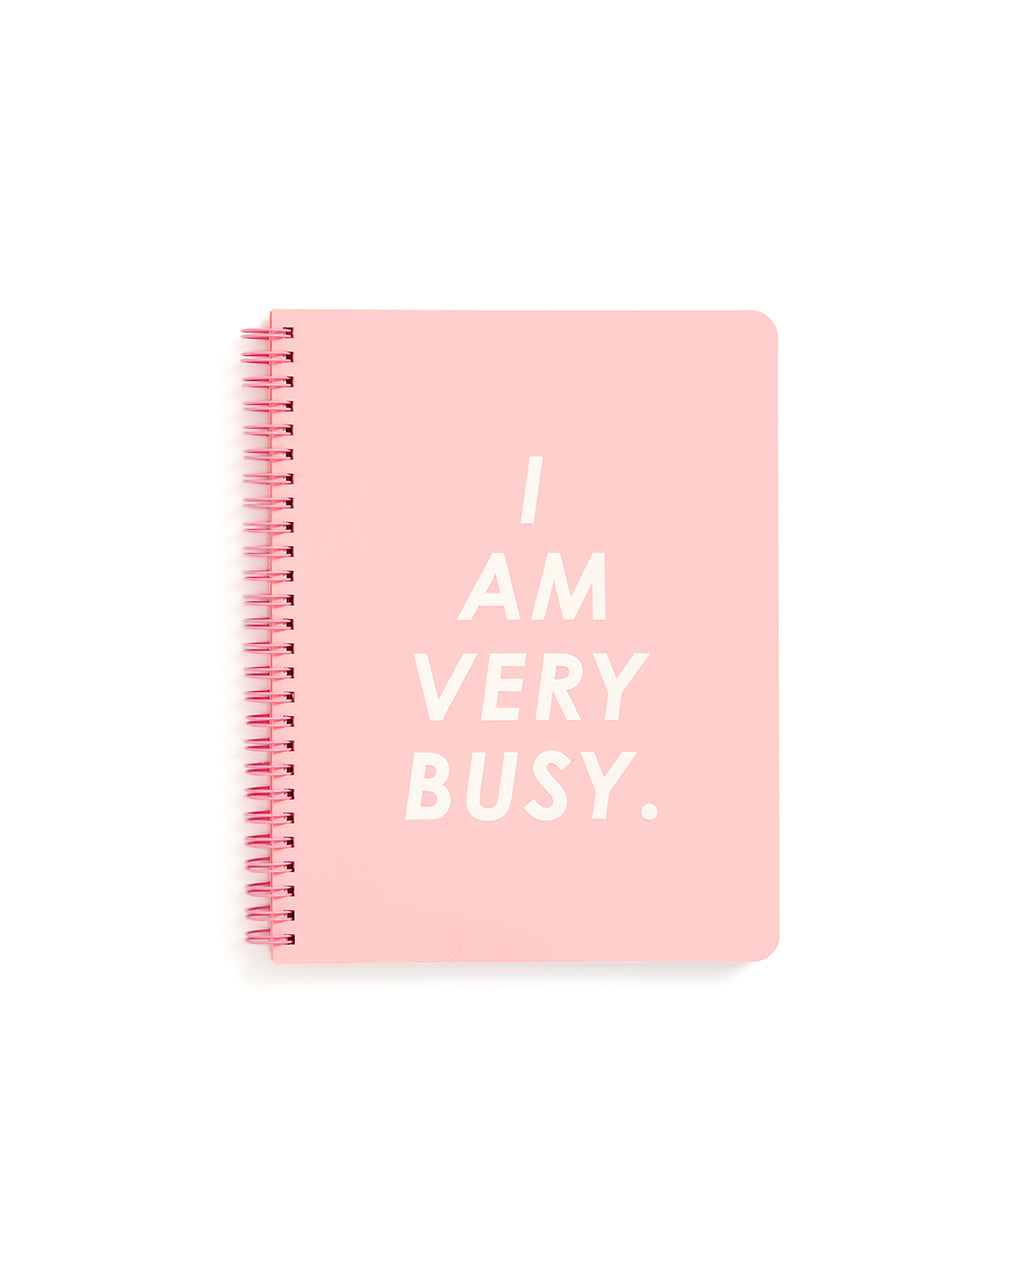 Rough Draft Mini Notebook - I Am Very Busy, Pink